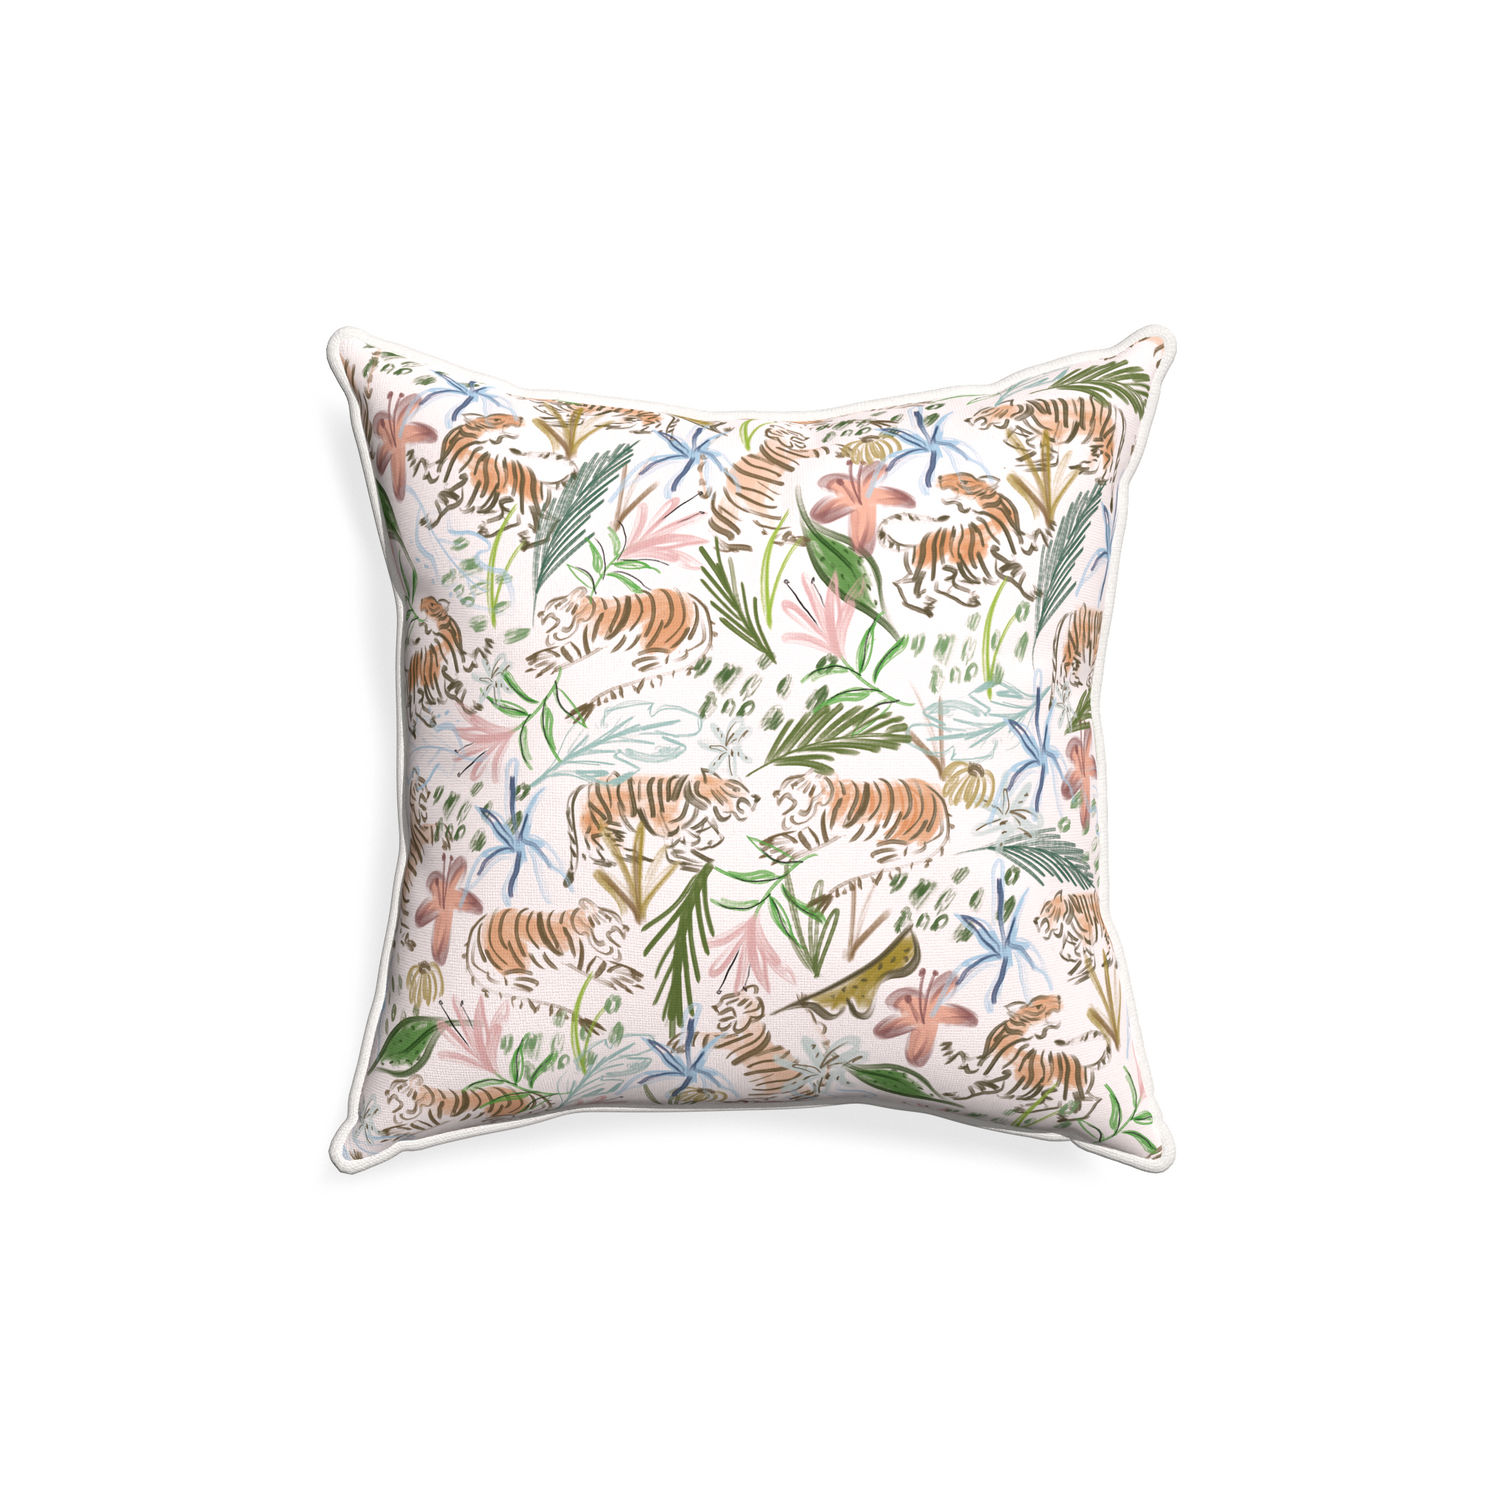 18-square frida pink custom pink chinoiserie tigerpillow with snow piping on white background